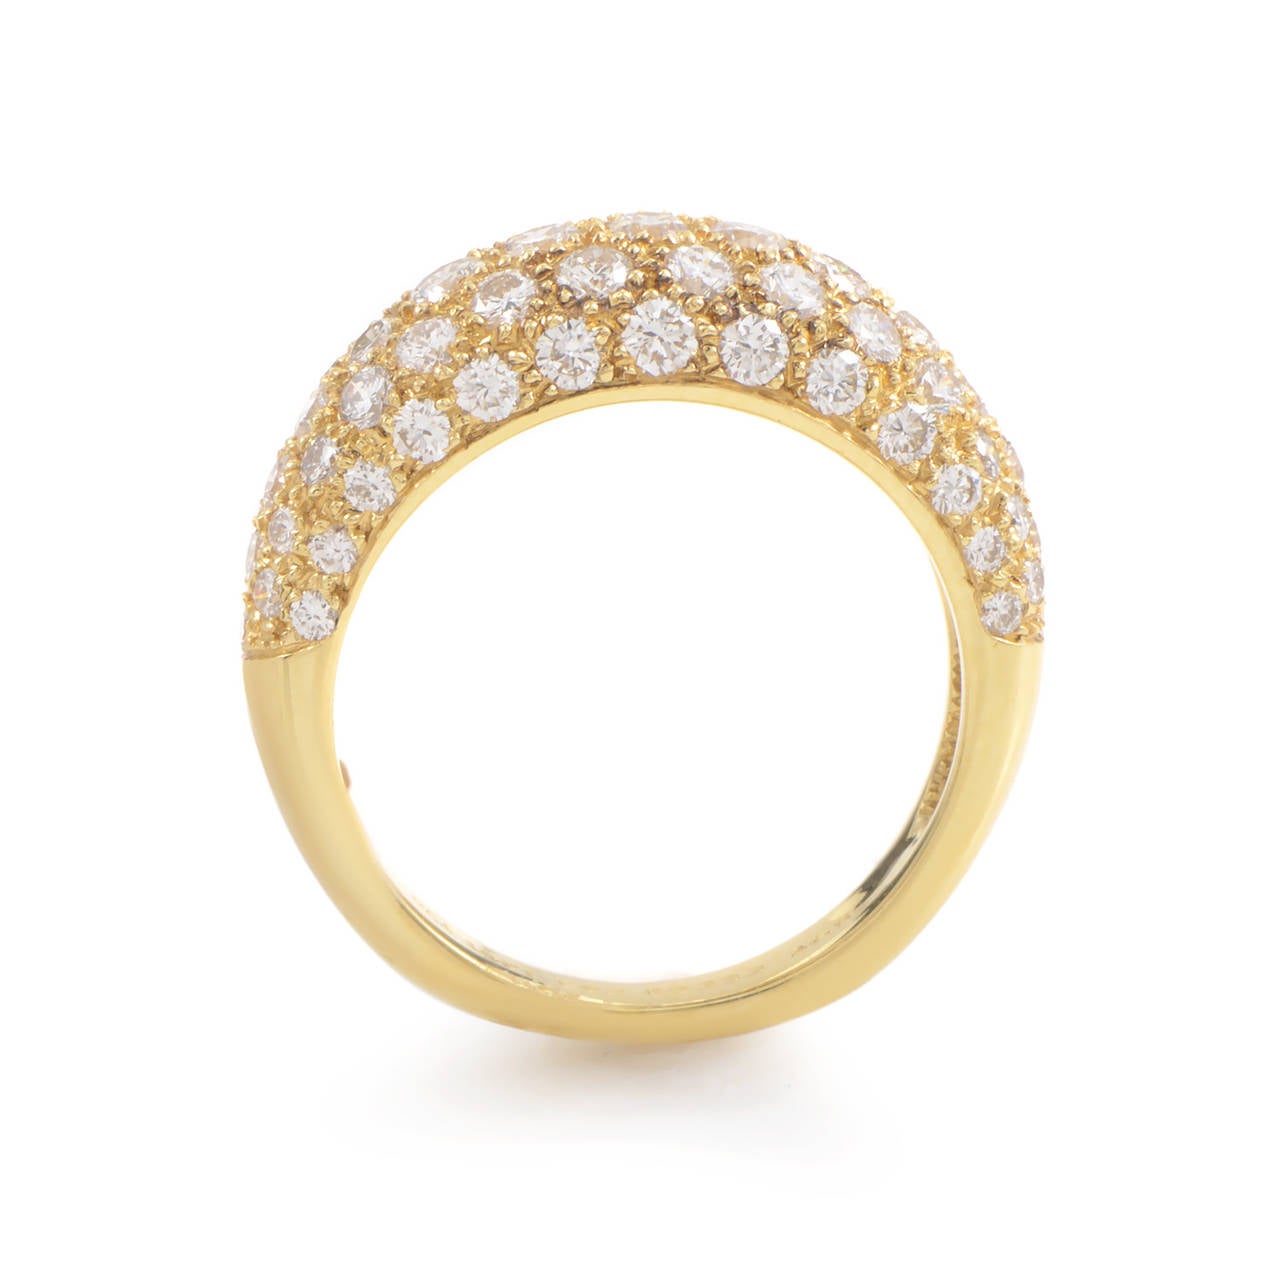 The delicate shimmer of diamonds paired with the timeless glow of gold makes this band ring from Van Cleef & Arpels a must-have design. The ring is made of 18K yellow gold and is set with an ~.75ct partial diamond pave.

Ring Size: 5.75 (50 7/8)